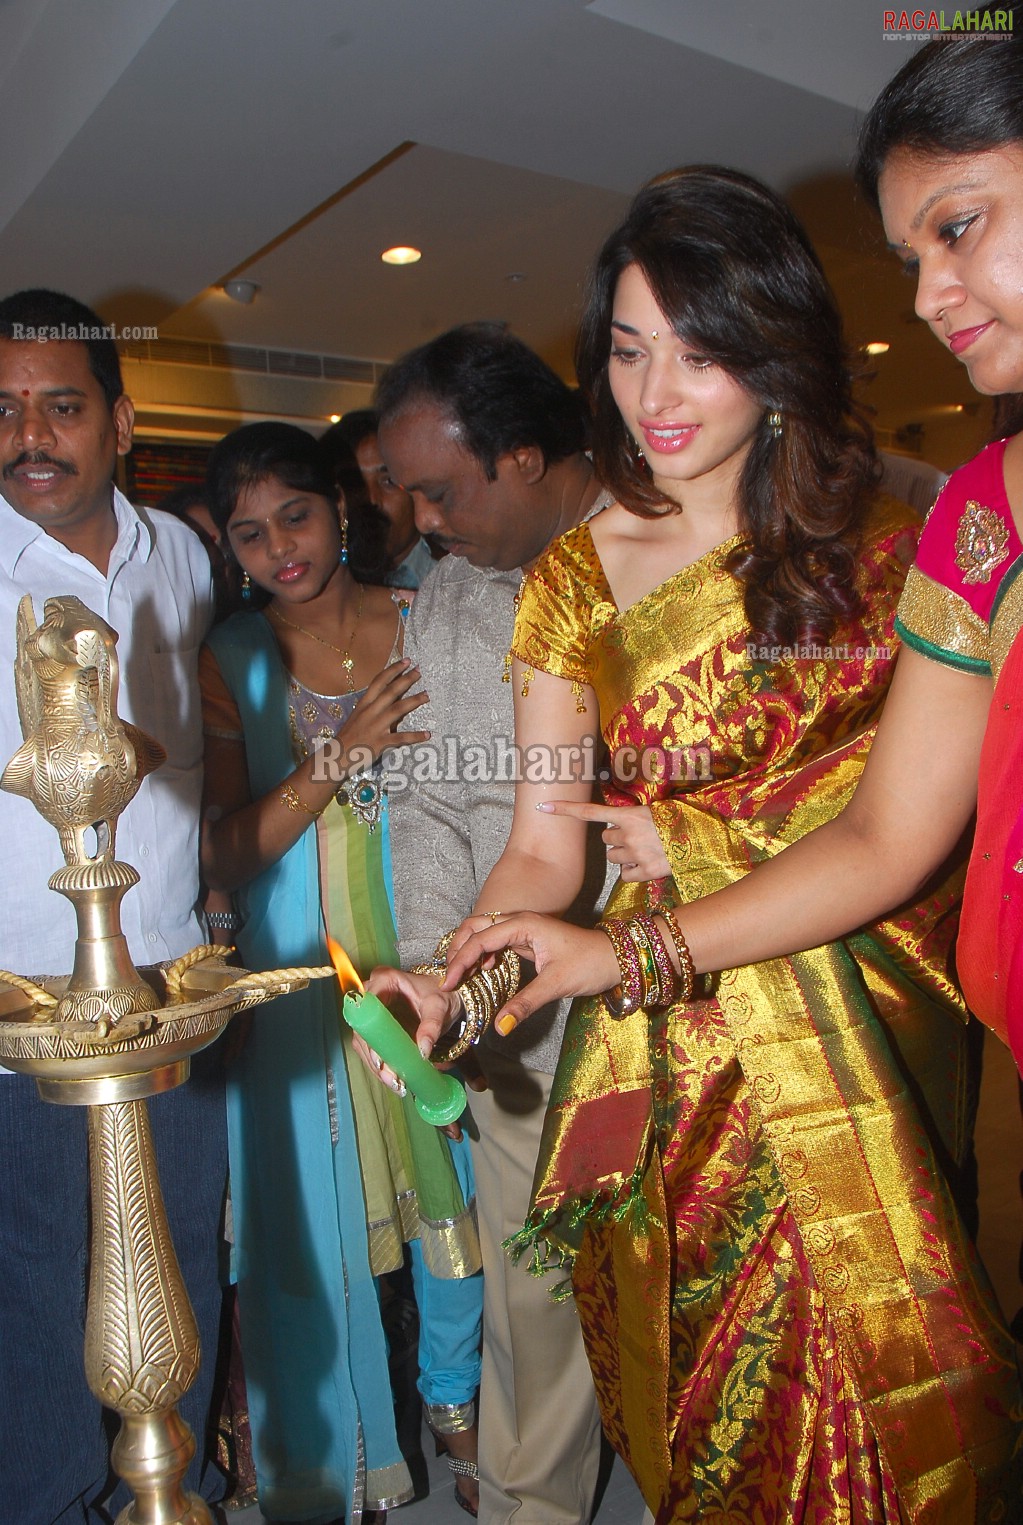 Tamanna launches Woman's World